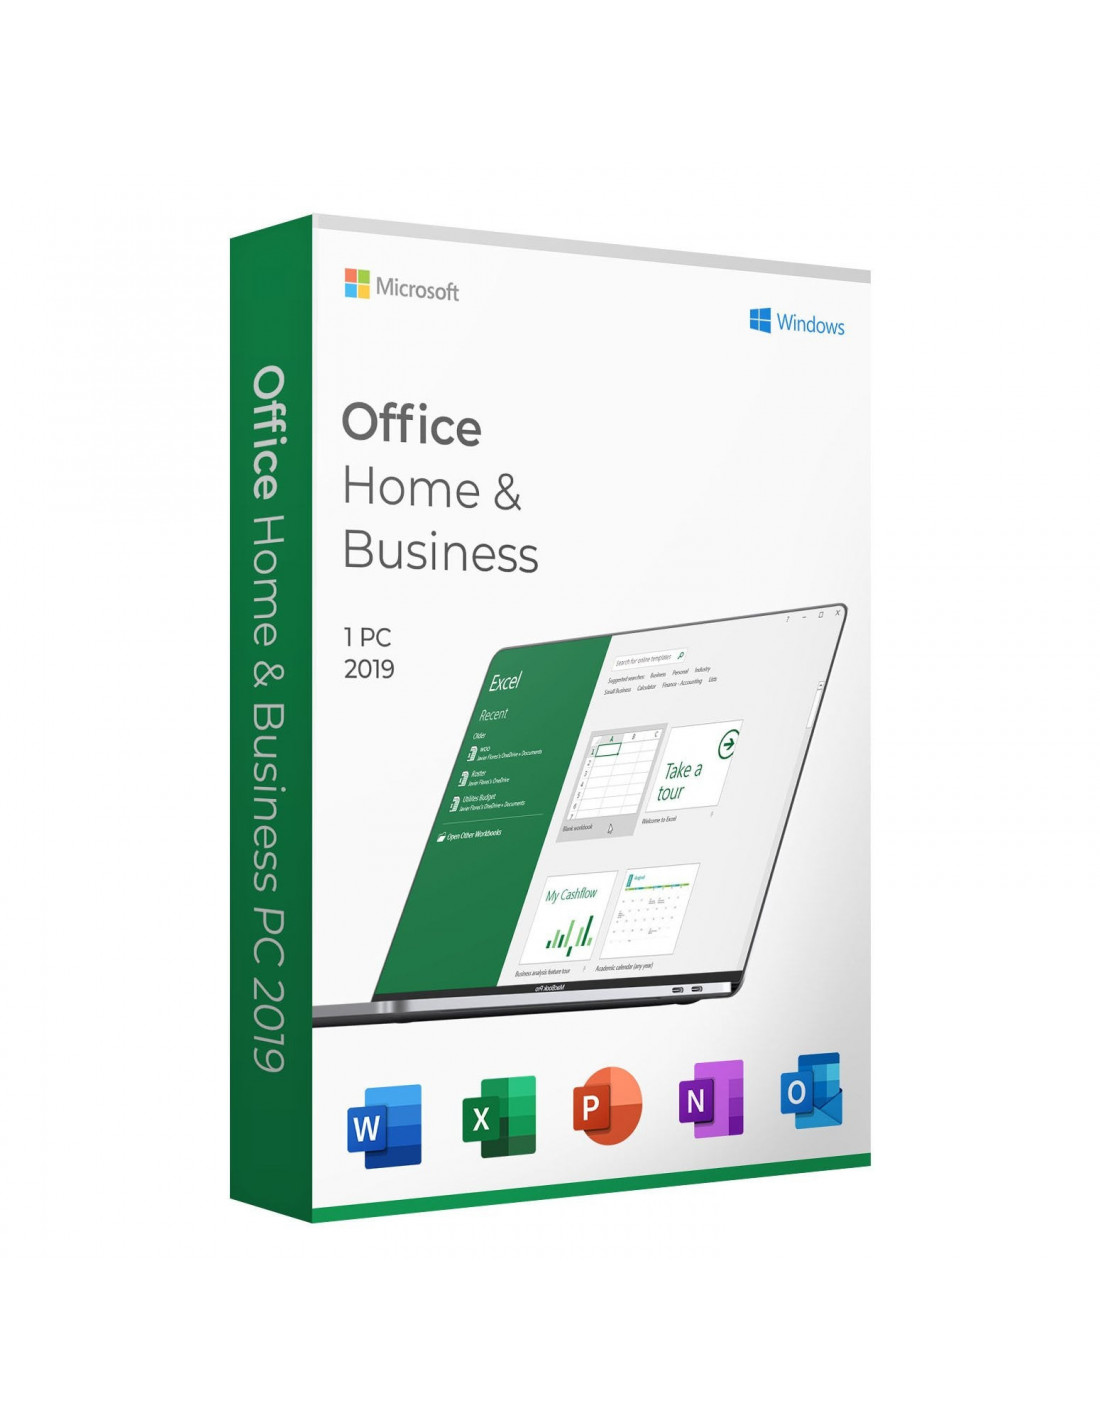 Microsoft Office 2019 Home & Business for Windows PC